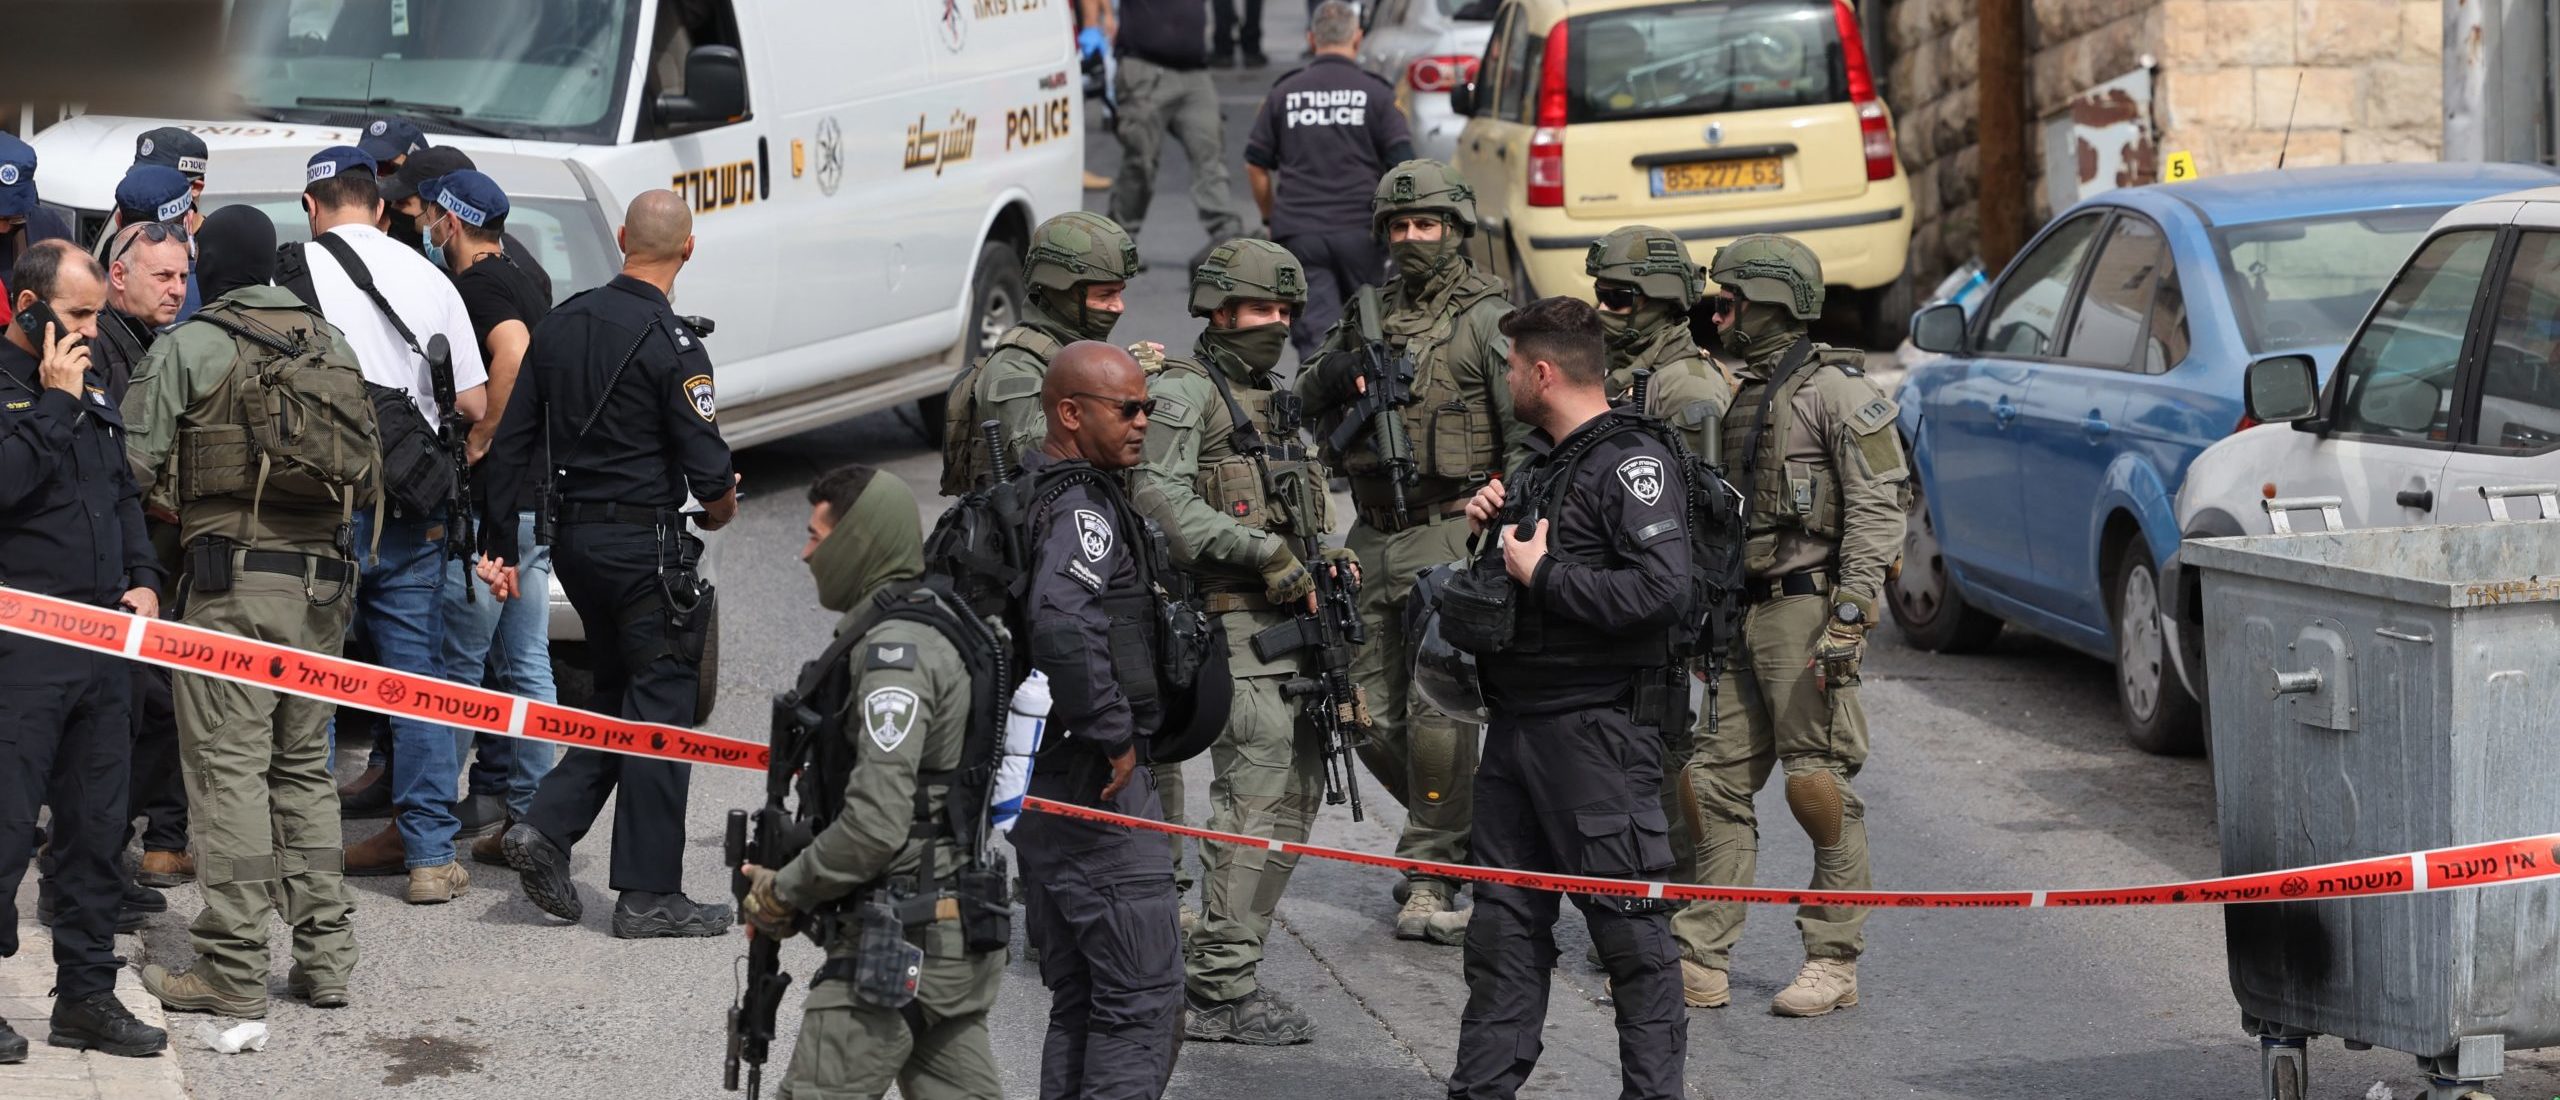 Israeli security forces and emergency service personnel gather at a cordoned-off area in Jerusalem's predominantly Arab neighbourhood of Silwan, where an assailant reportedly shot and wounded two people, on January 28, 2023. (Photo by AHMAD GHARABLI/AFP via Getty Images)